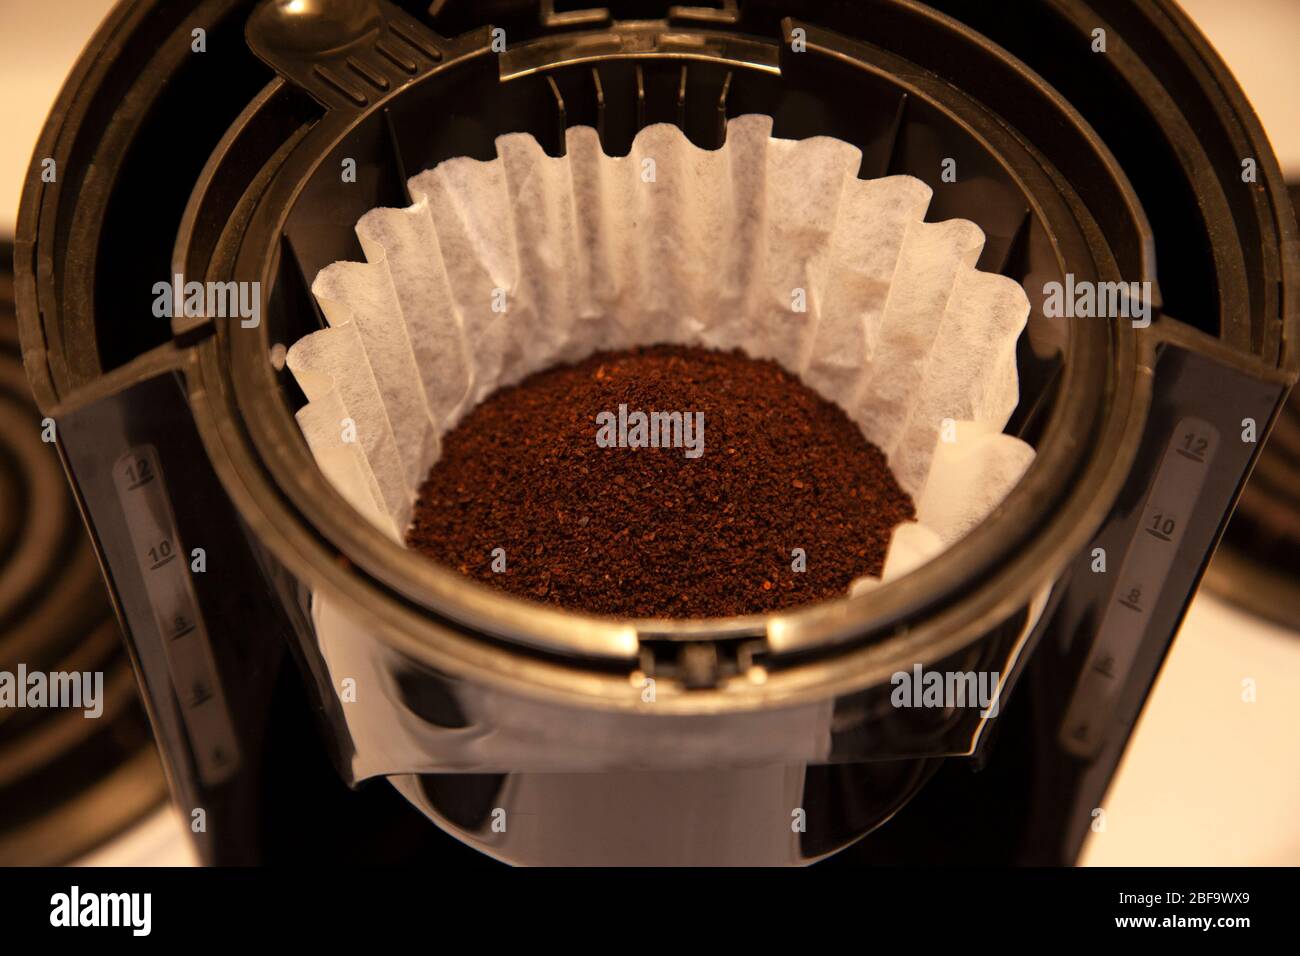 a paper filter is full of fresh coffee grinds ready for brewing Stock Photo